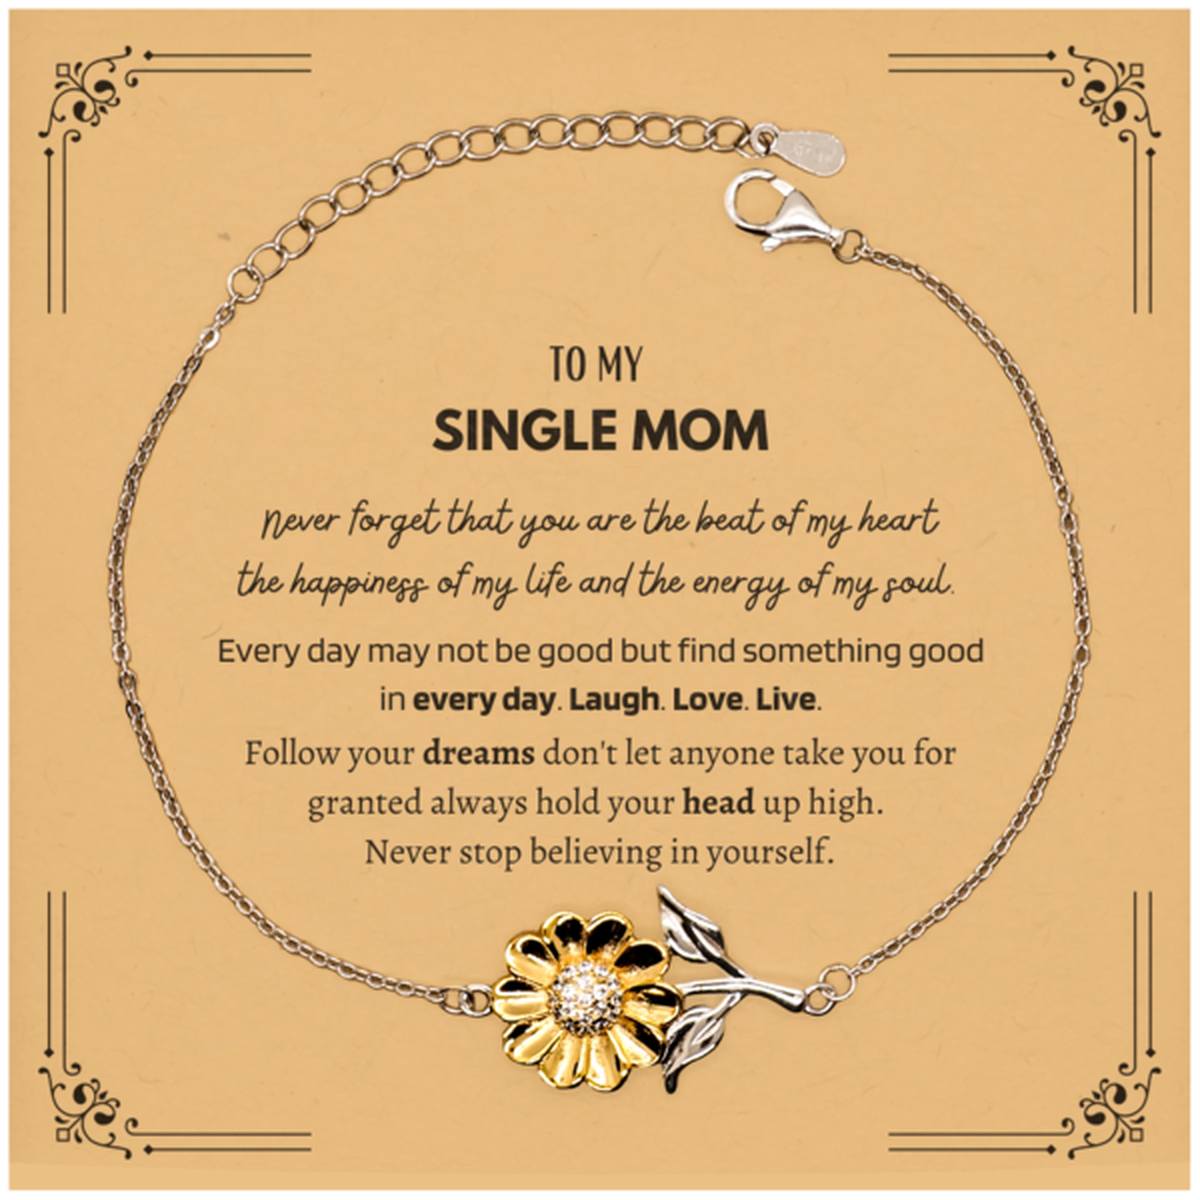 To My Single Mom Message Card Gifts, Christmas Single Mom Sunflower Bracelet Present, Birthday Unique Motivational For Single Mom, To My Single Mom Never forget that you are the beat of my heart the happiness of my life and the energy of my soul